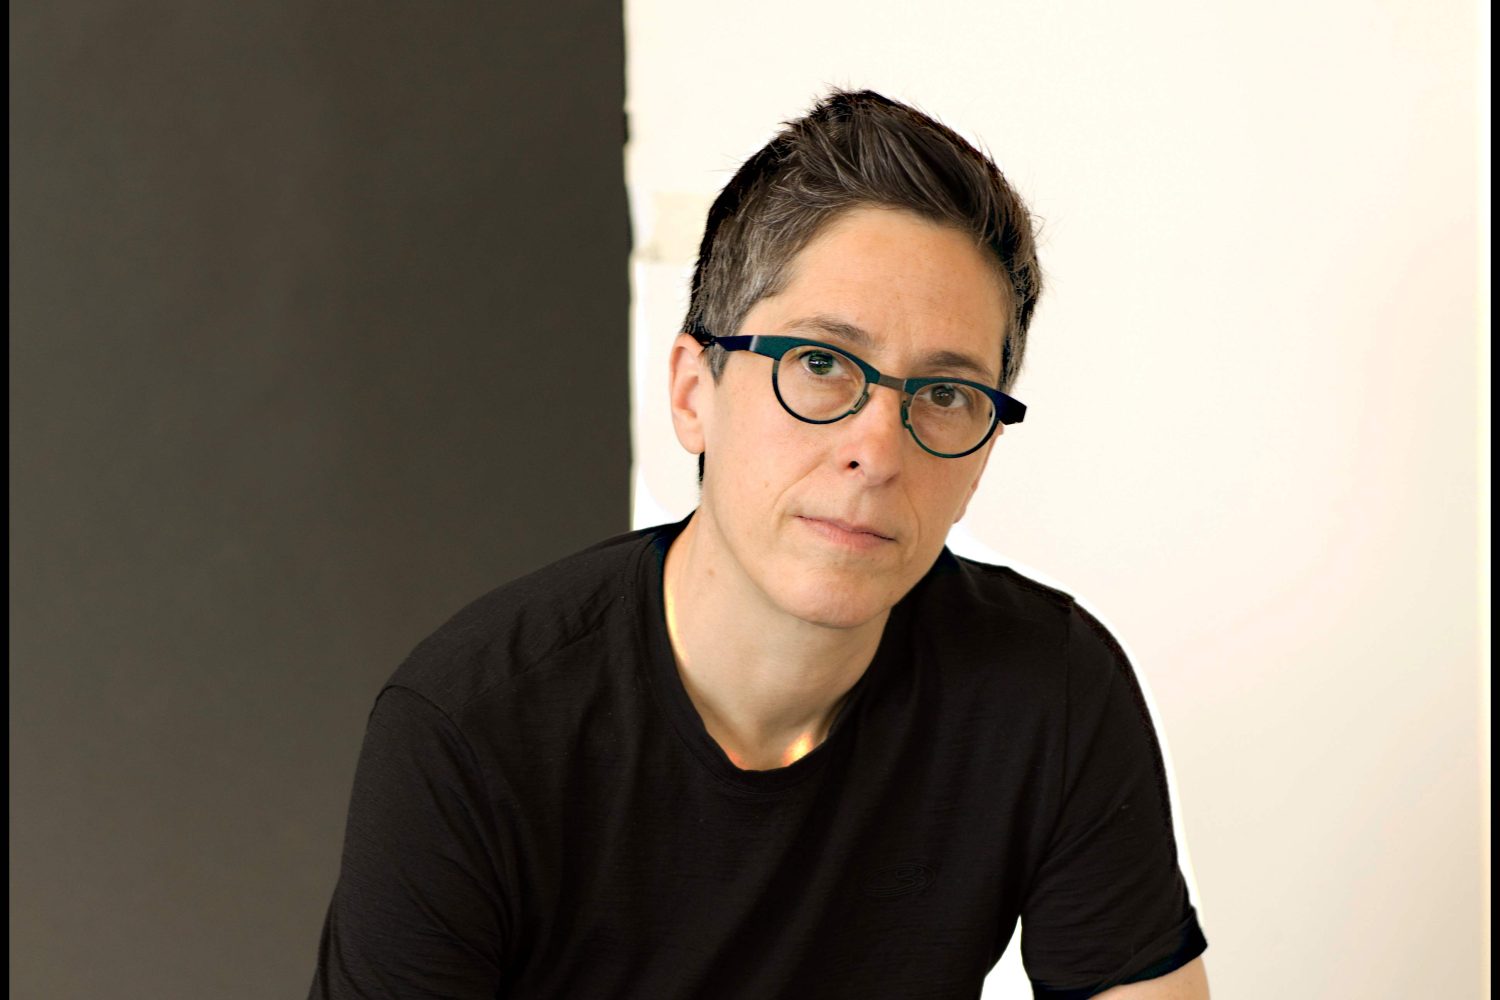 photo of alison bechdel in a black tshirt